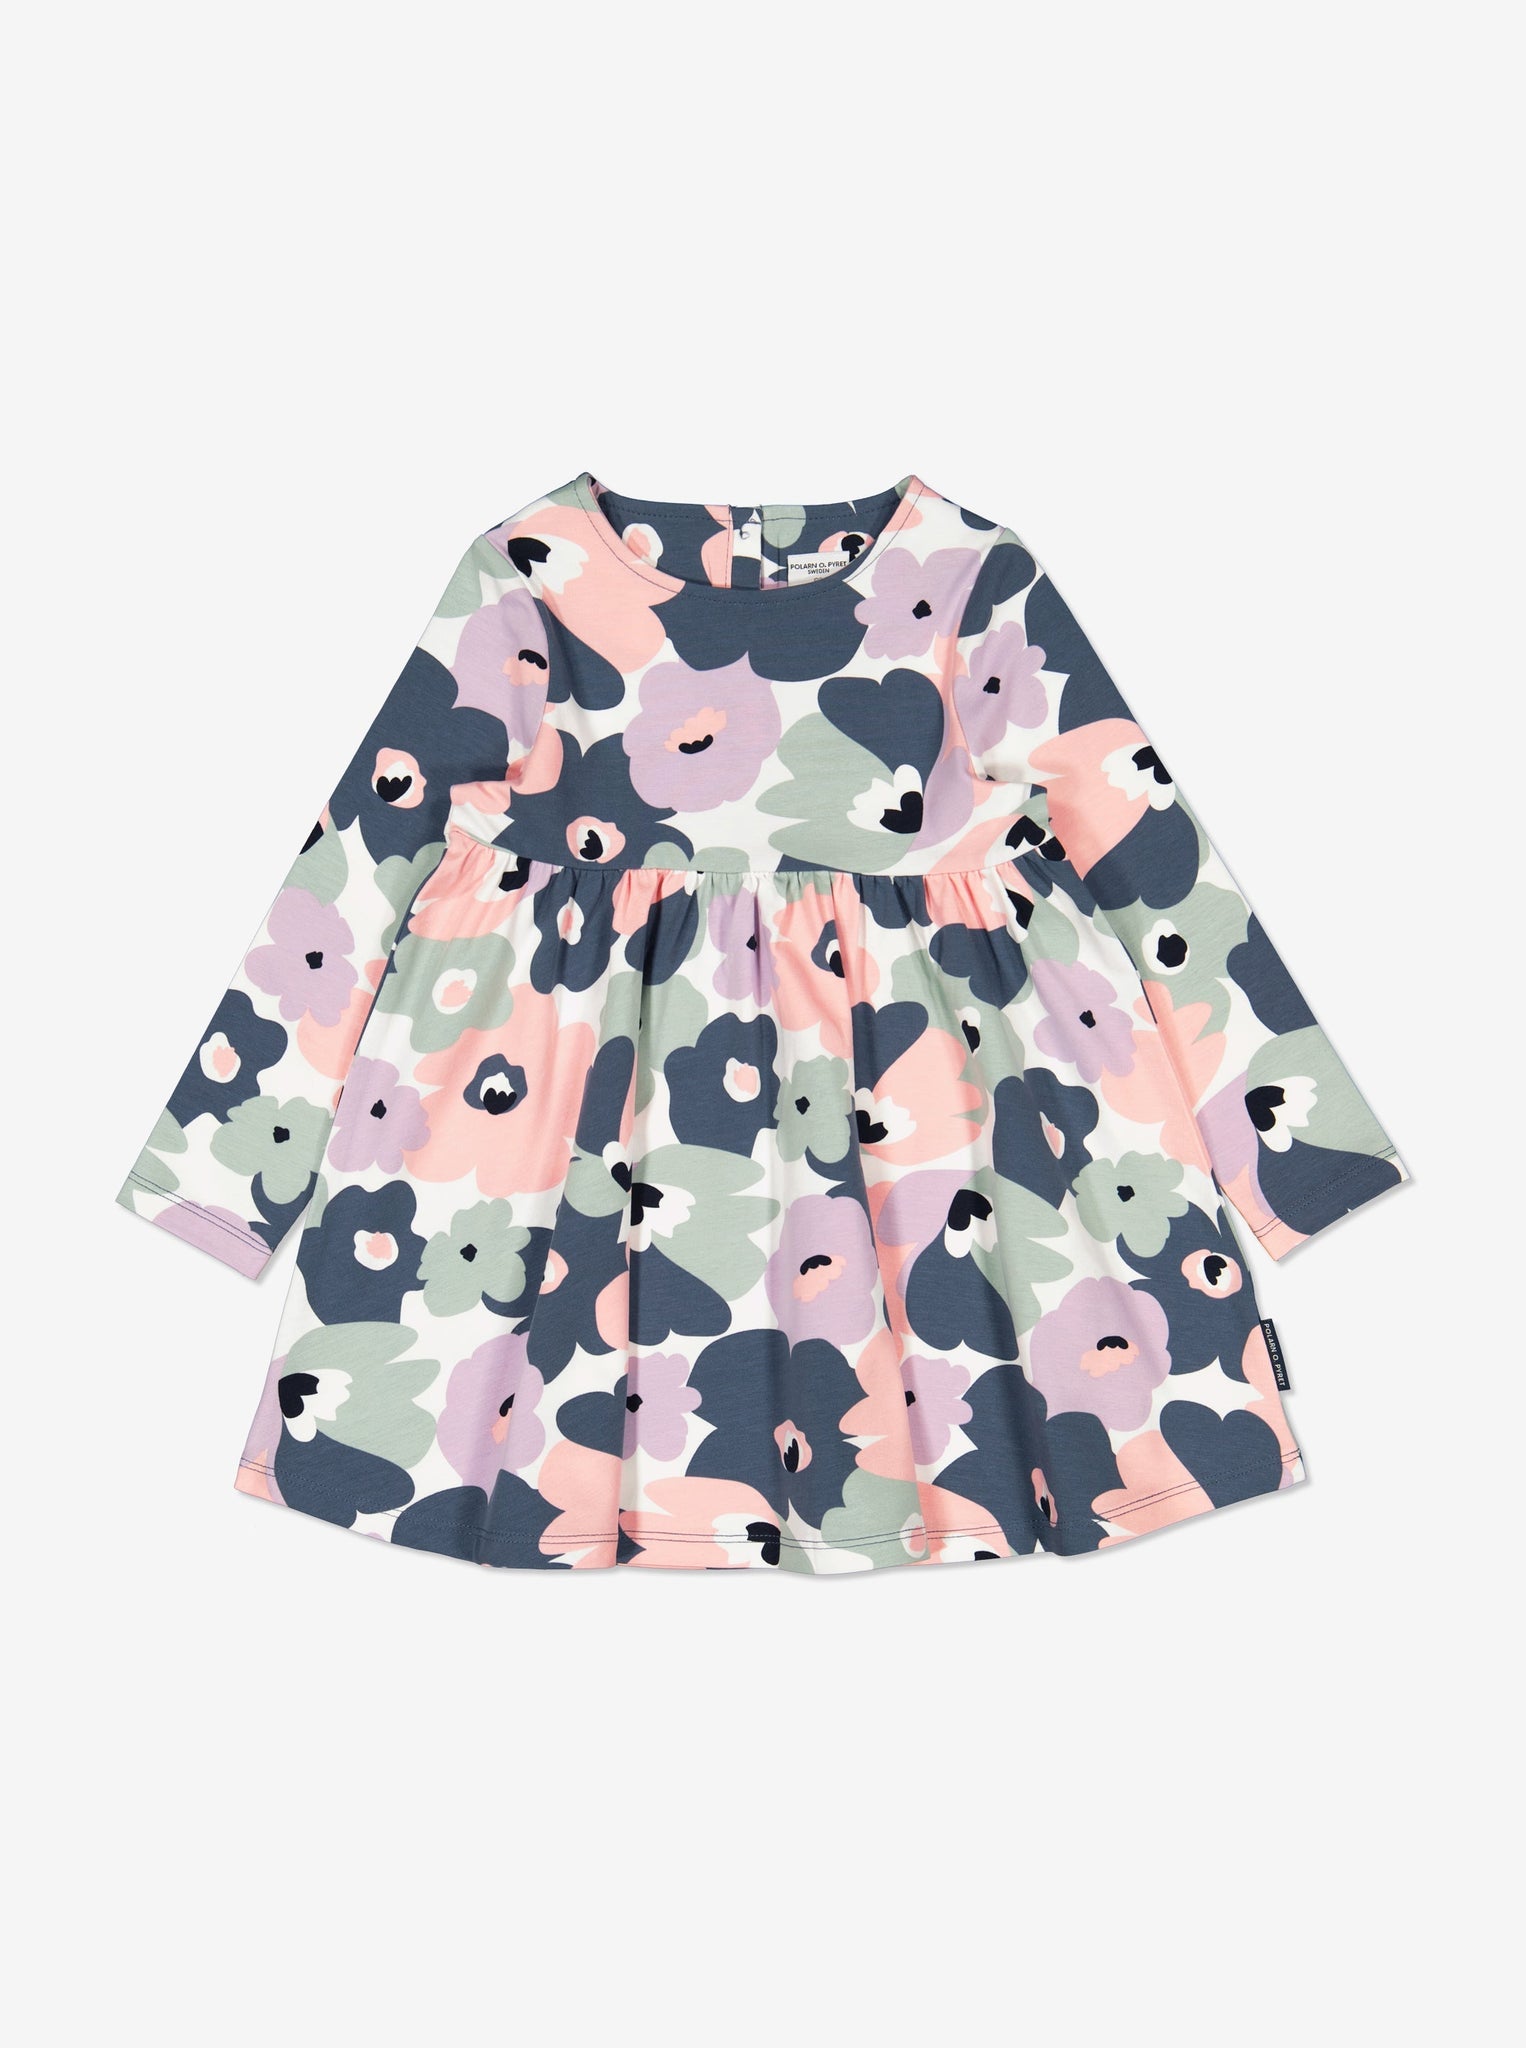  Organic Cotton Floral Kids Dress from Polarn O. Pyret Kidswear. Made using ethically sourced materials.